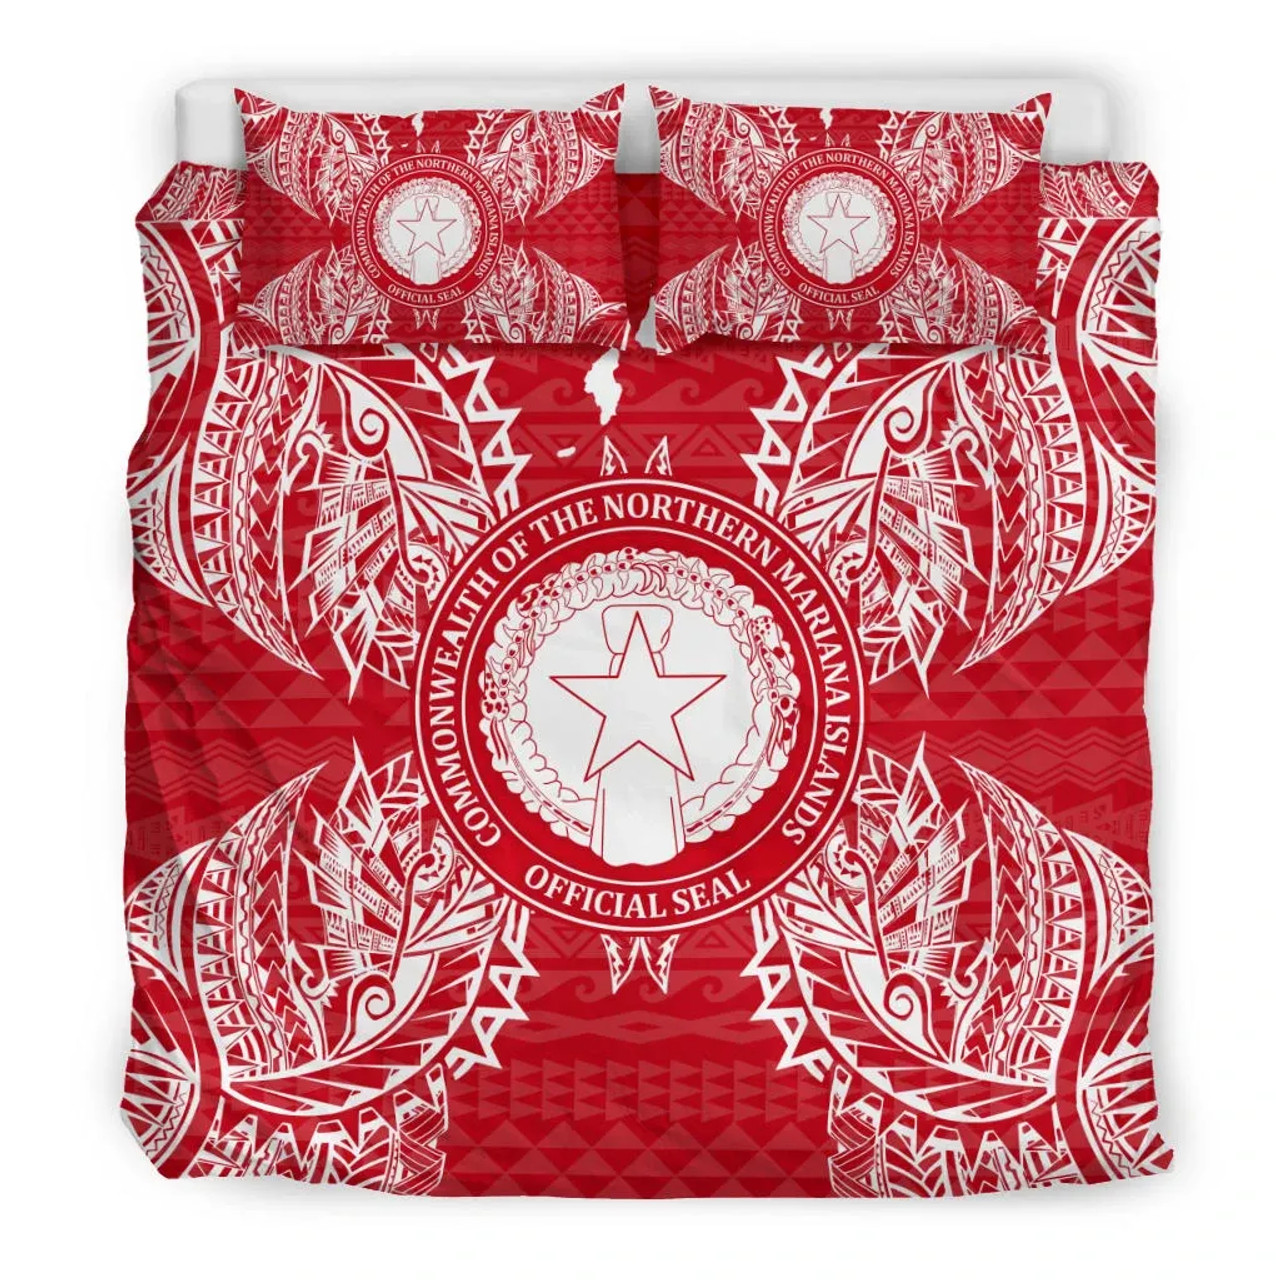 Polynesian Bedding Set - Northern Mariana Islands Duvet Cover Set Map Red White 3